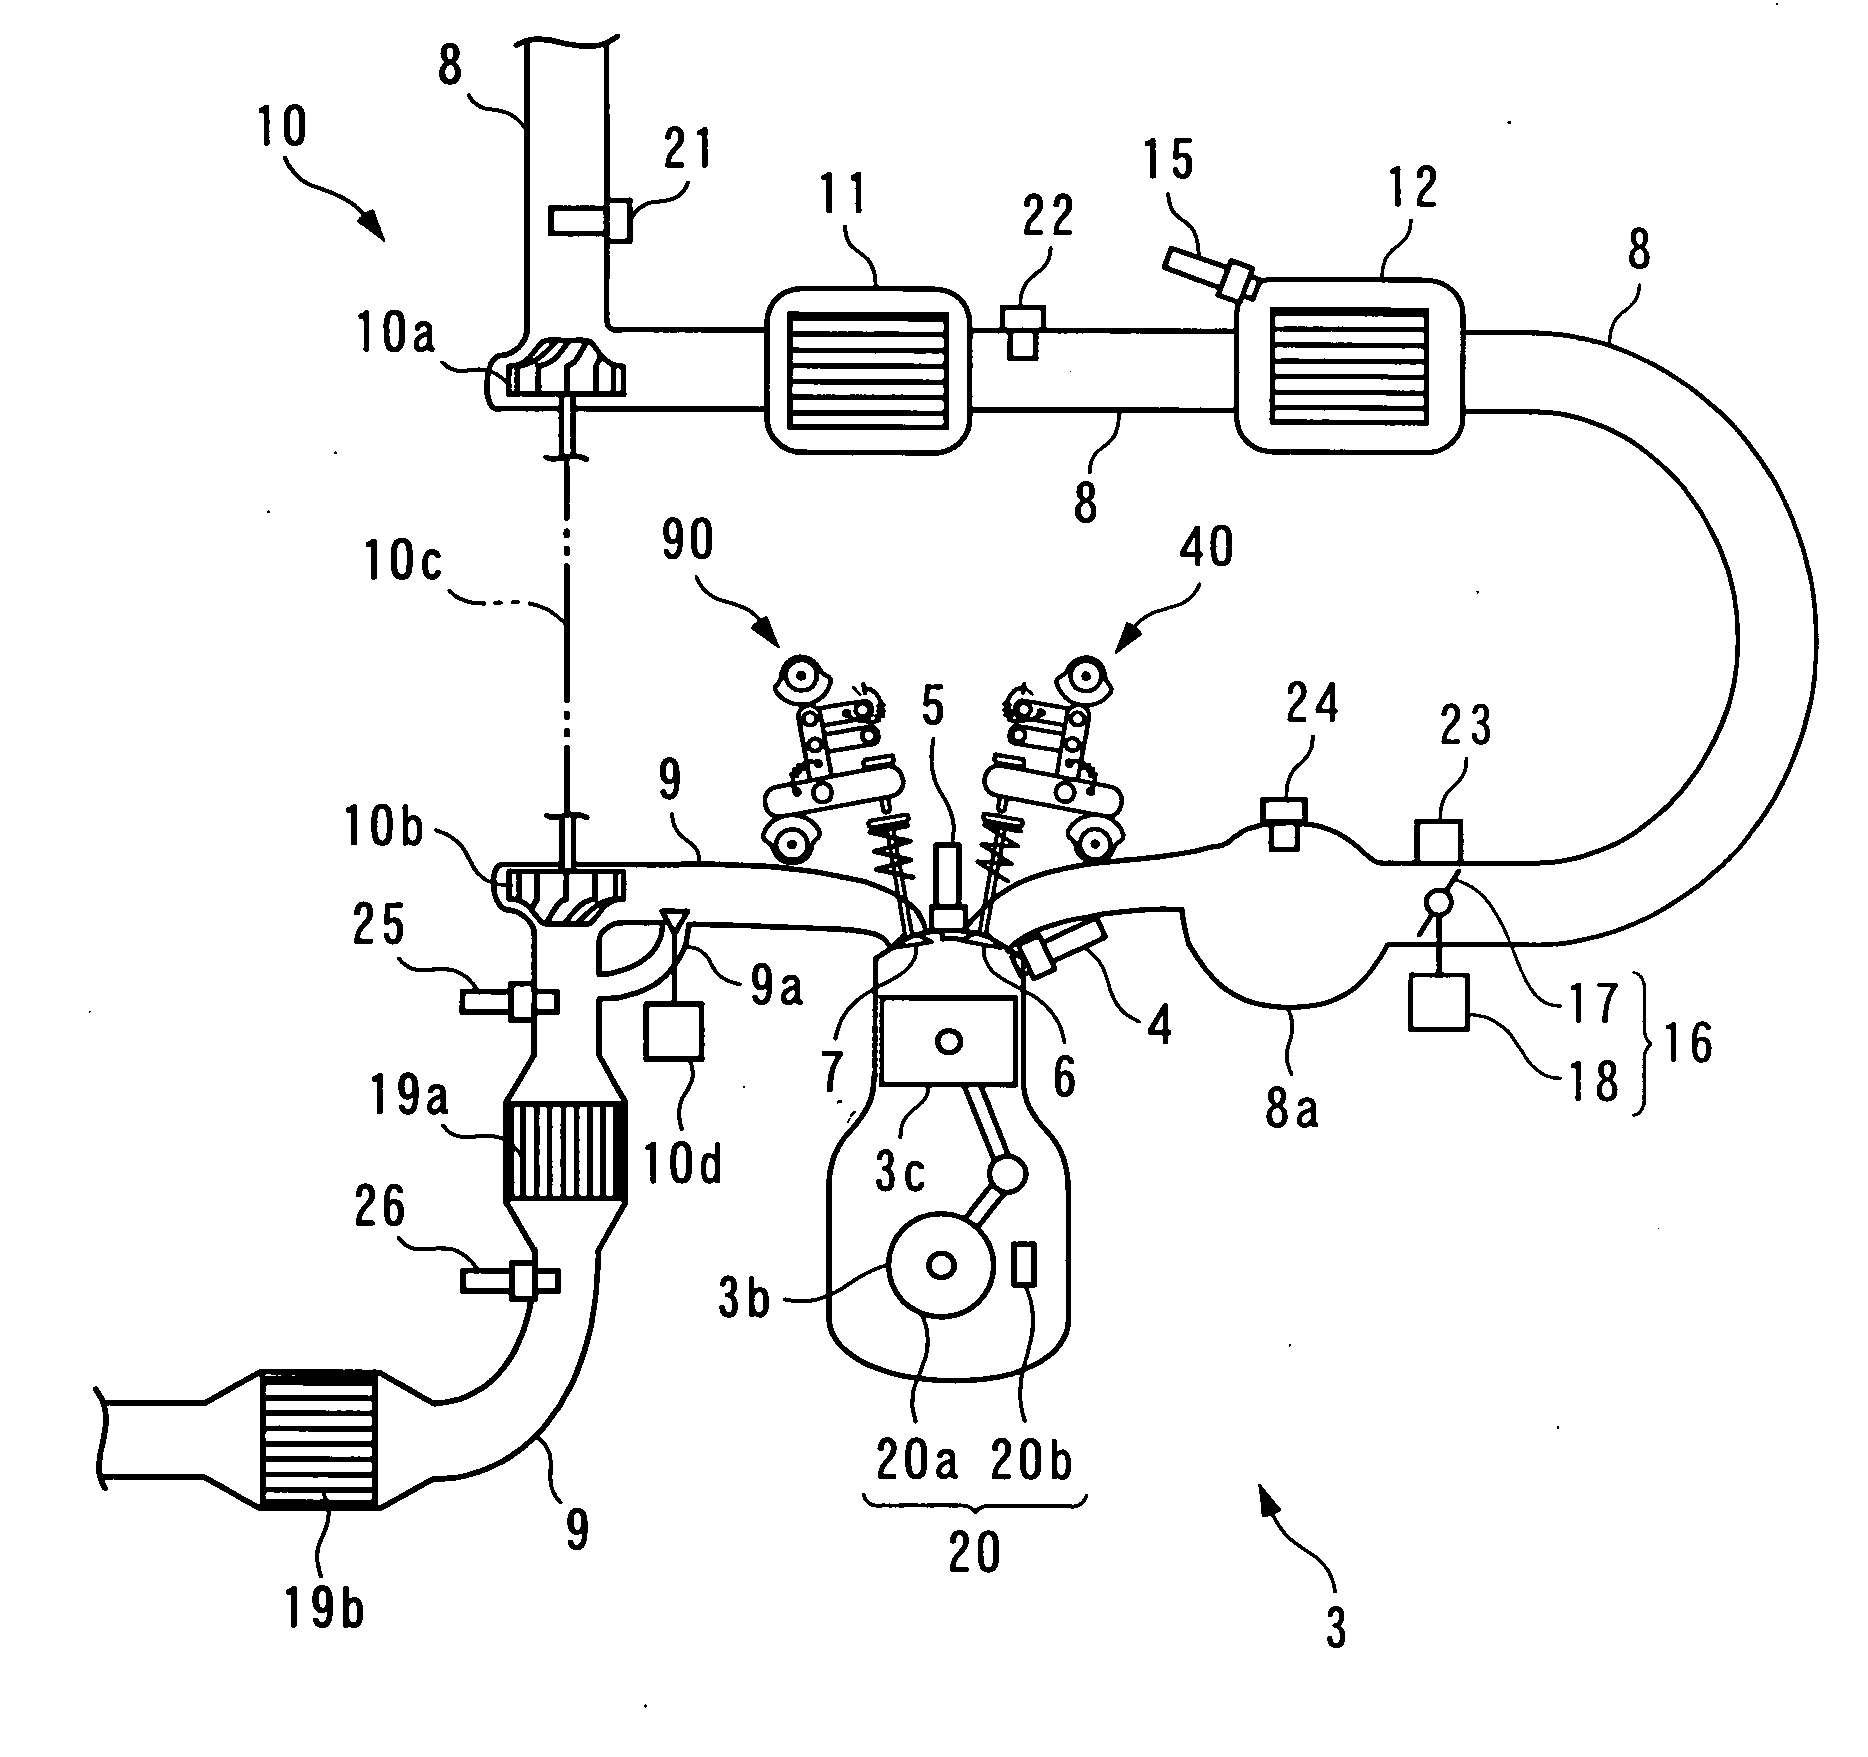 Intake Air Amount Control System for Internal Combustion Engine and Control System